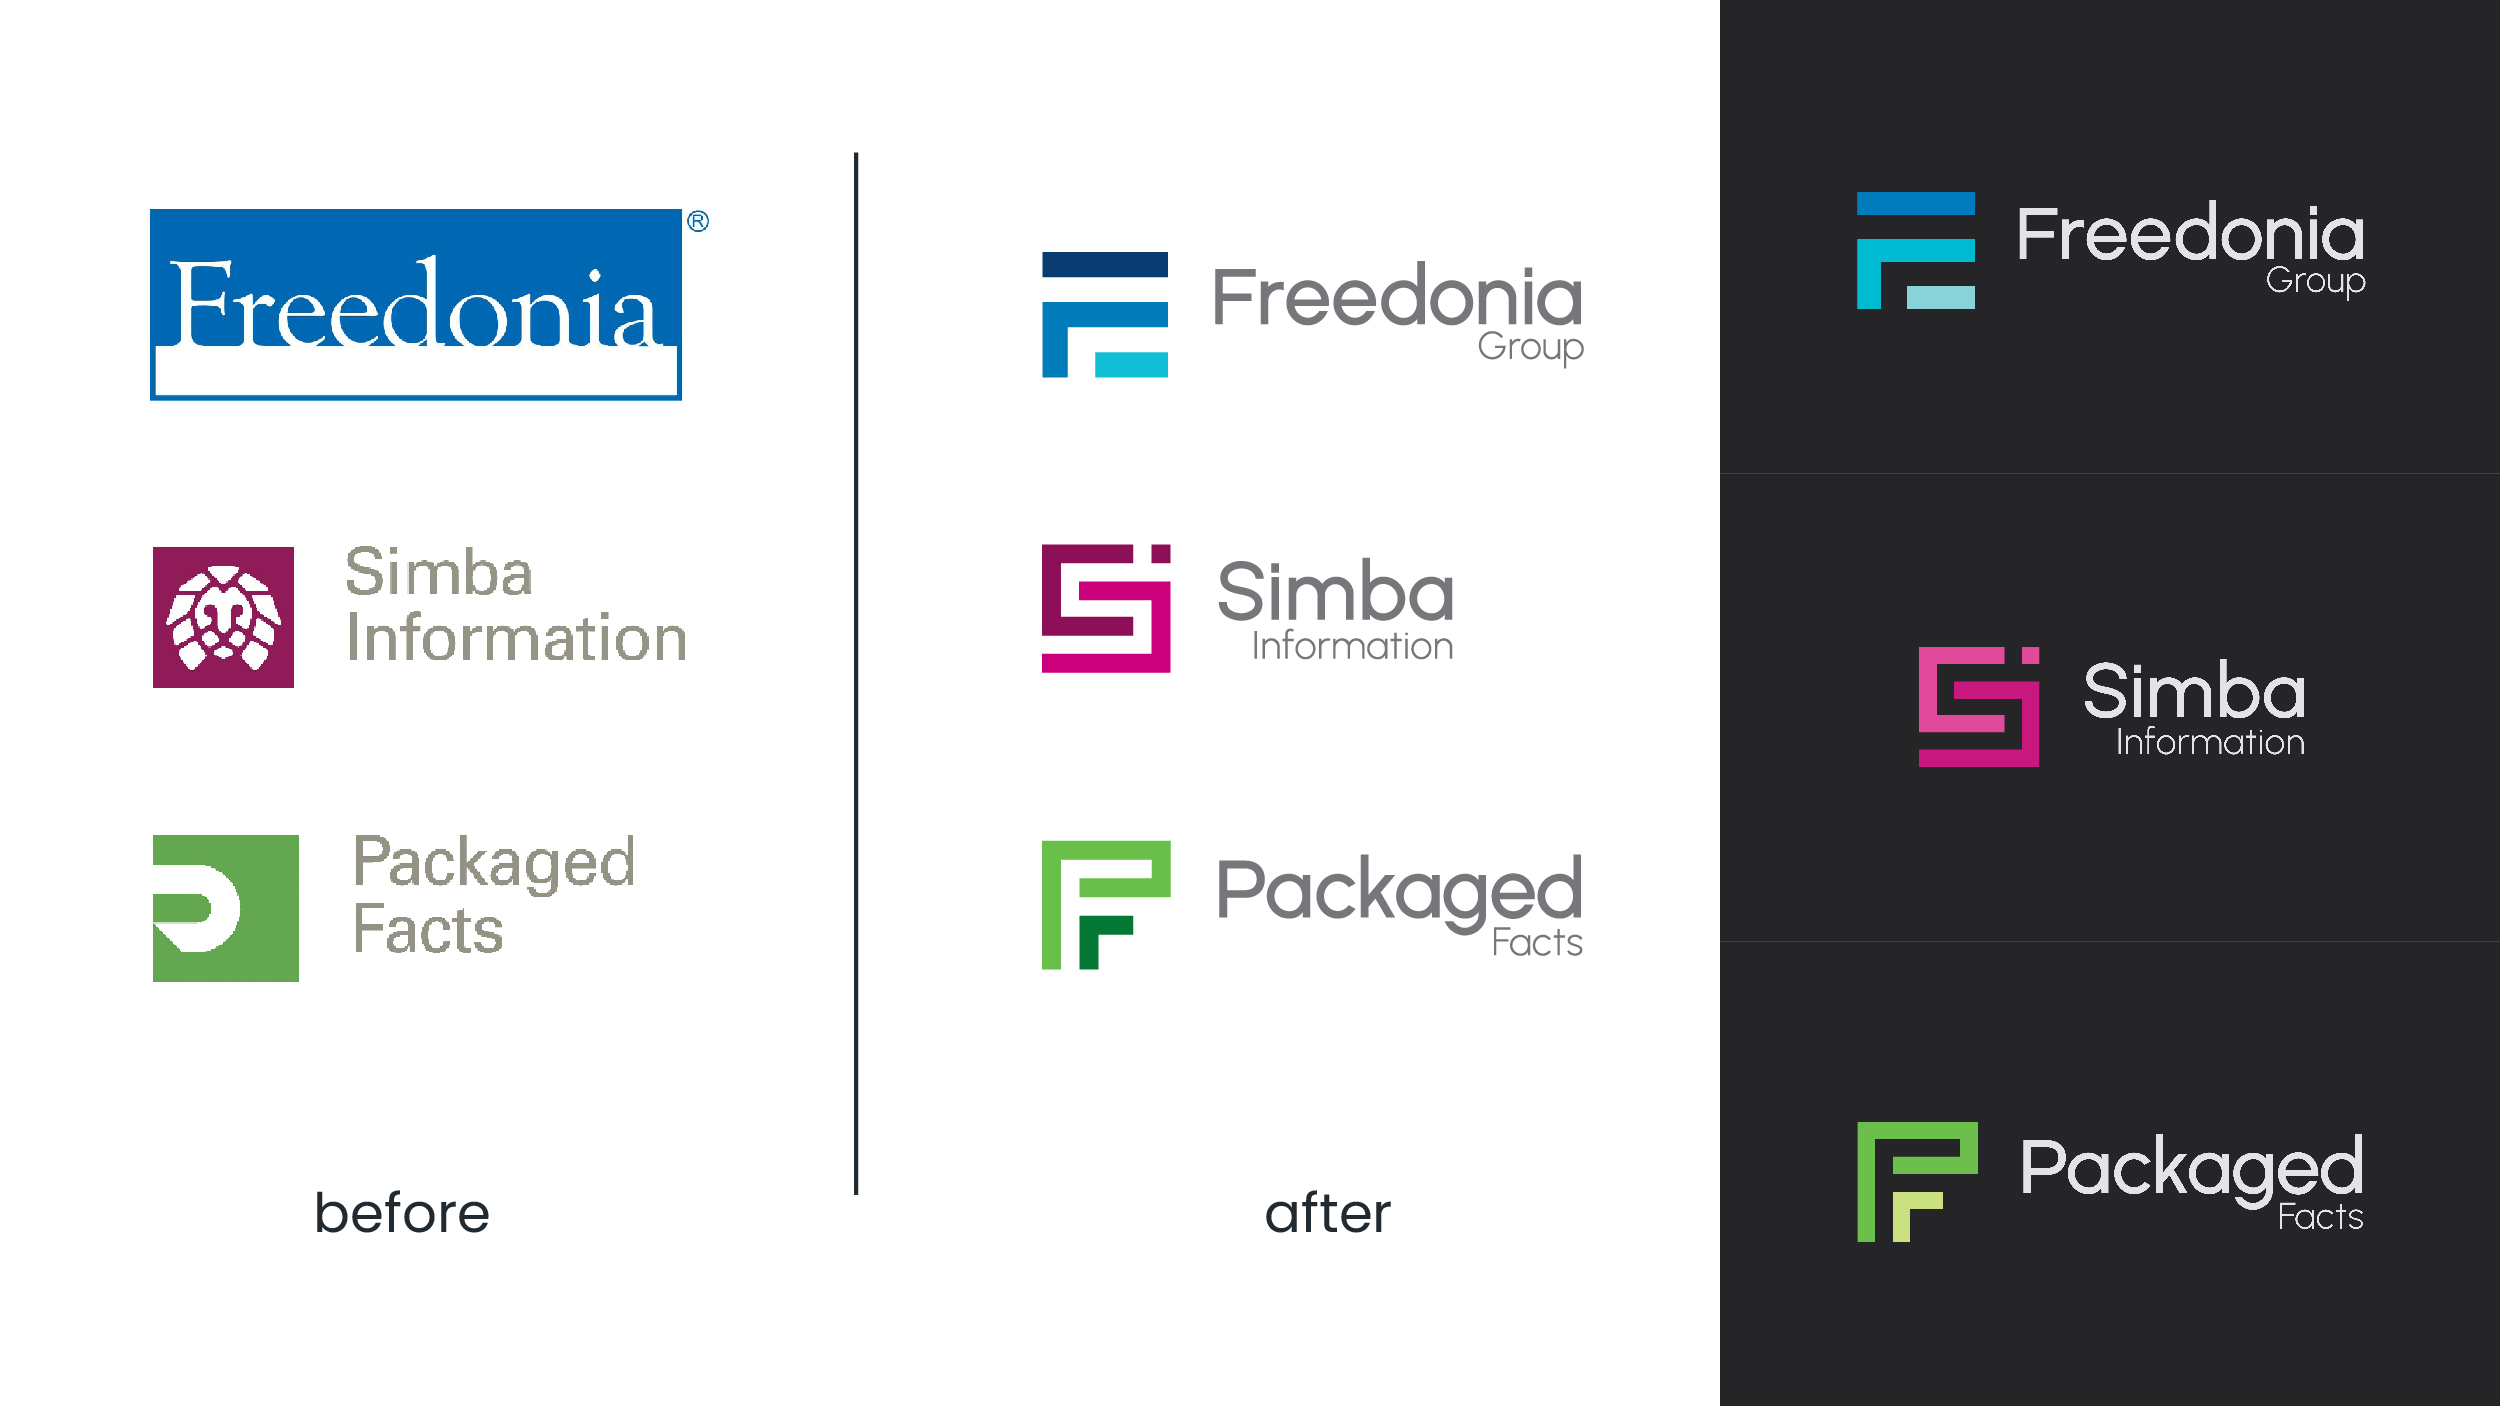 Freedonia Group and associated brands before and after logo comparison.